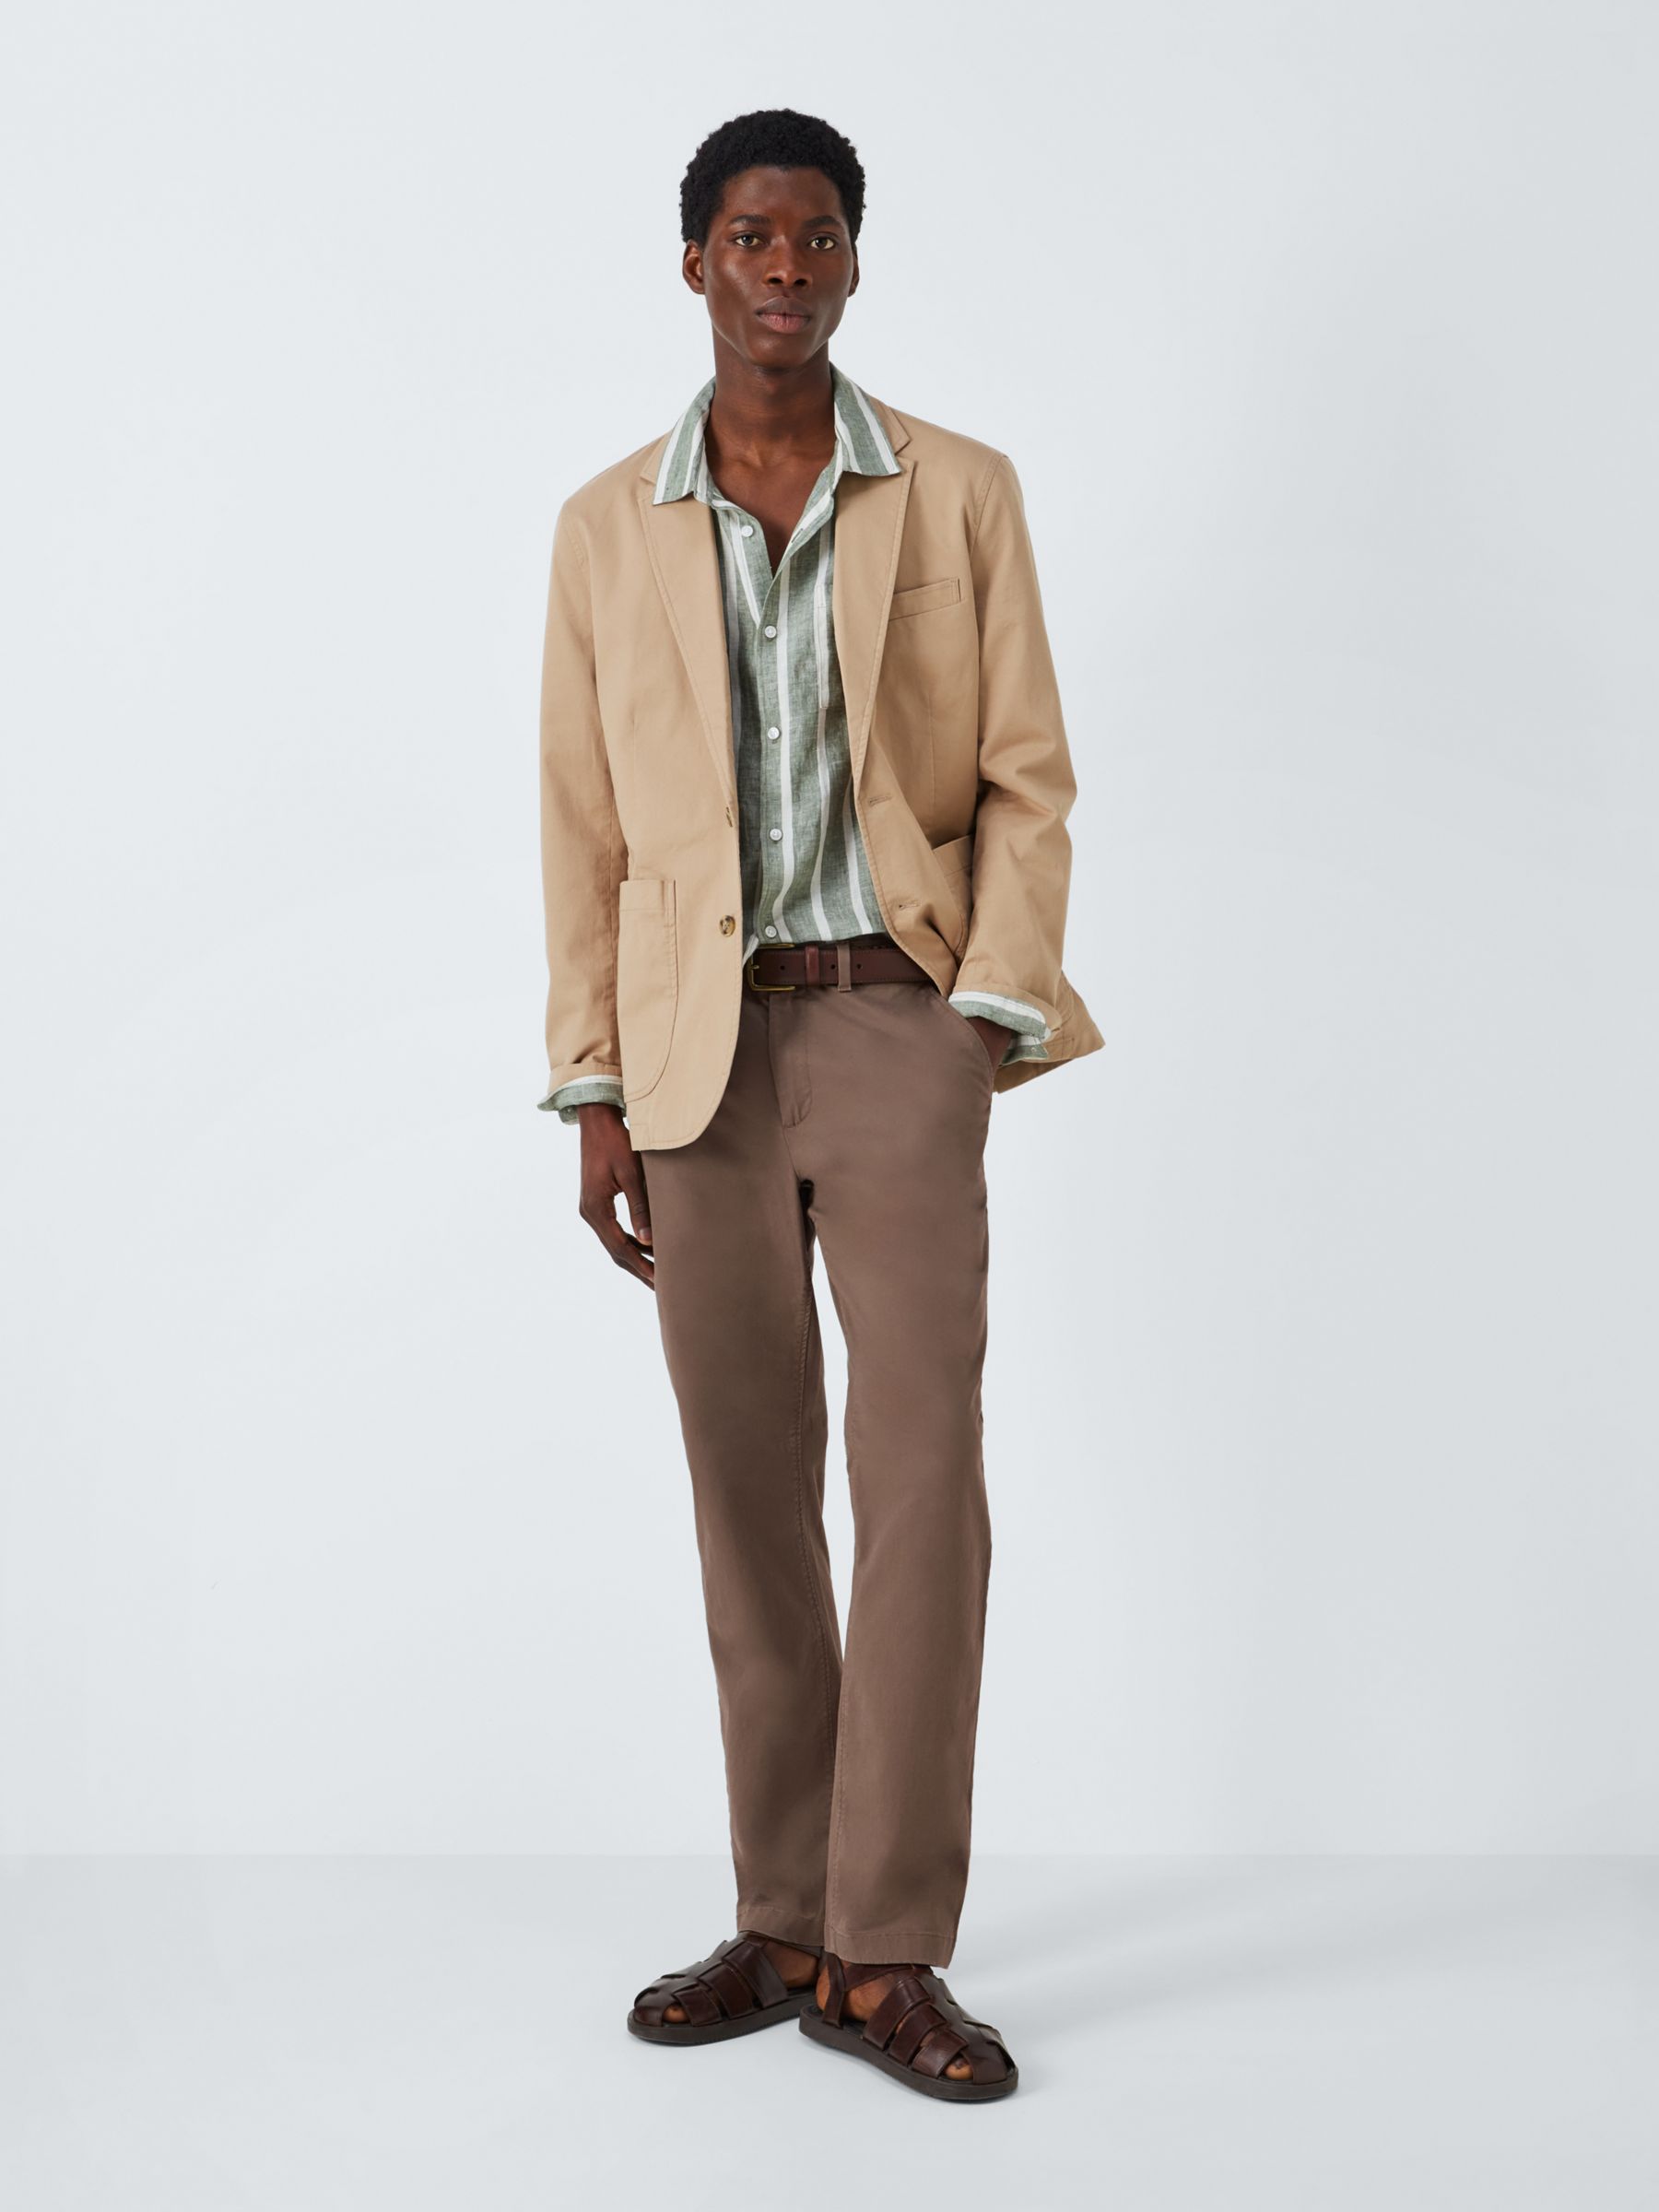 John Lewis Essential Straight Cut Chinos, Taupe at John Lewis & Partners